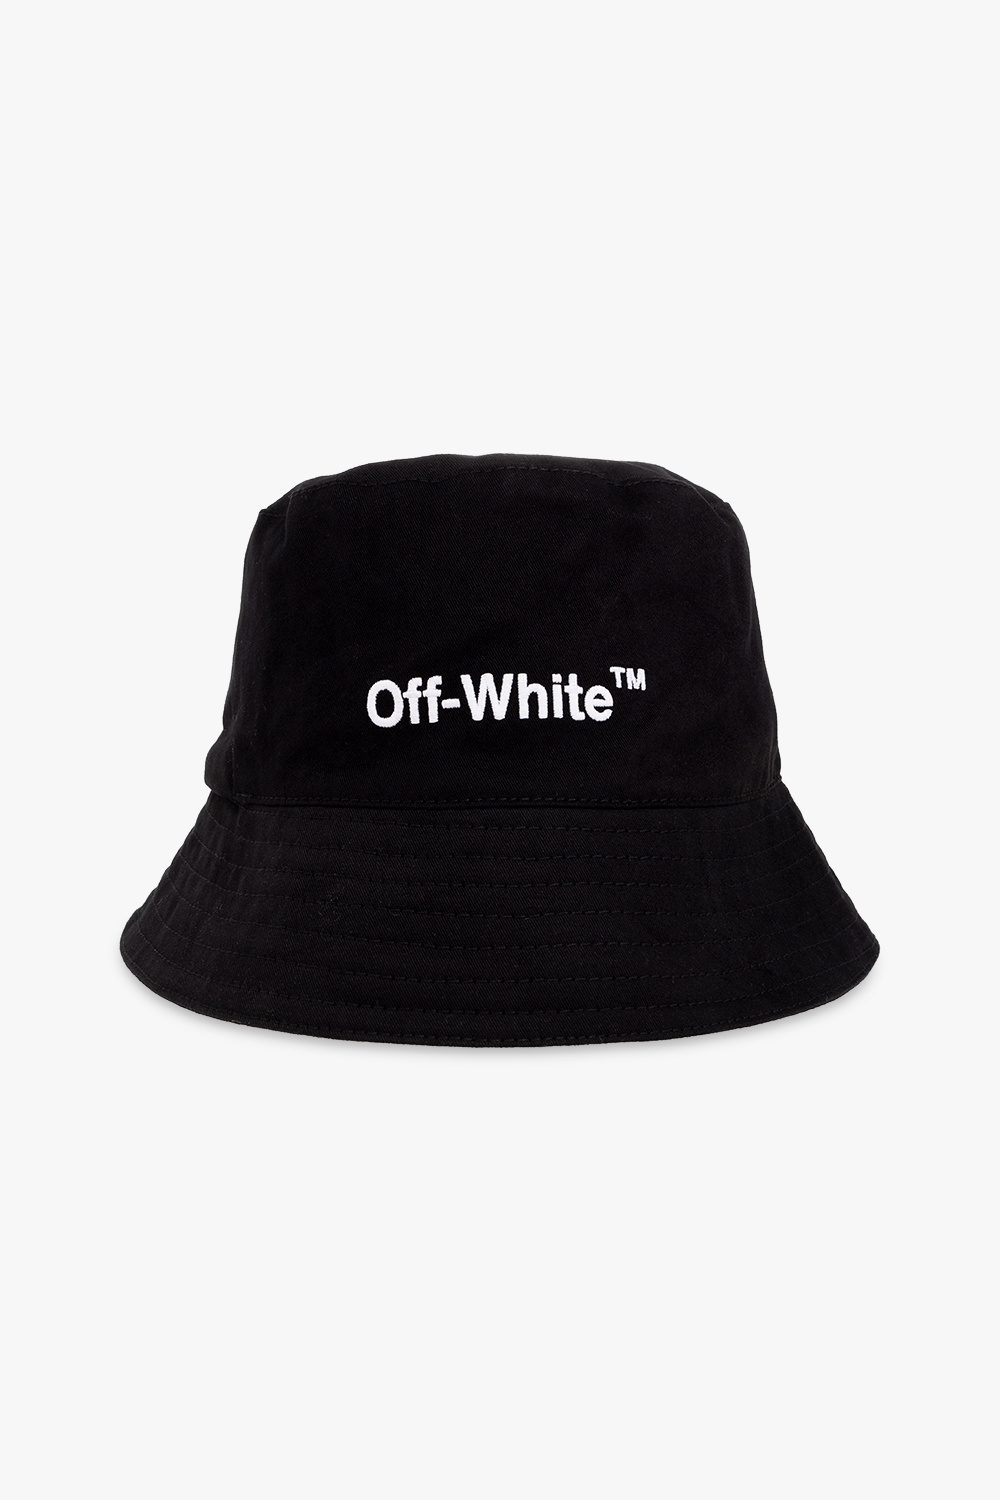 Off-White Oakland Athletics AC Perf 59Fifty Cap